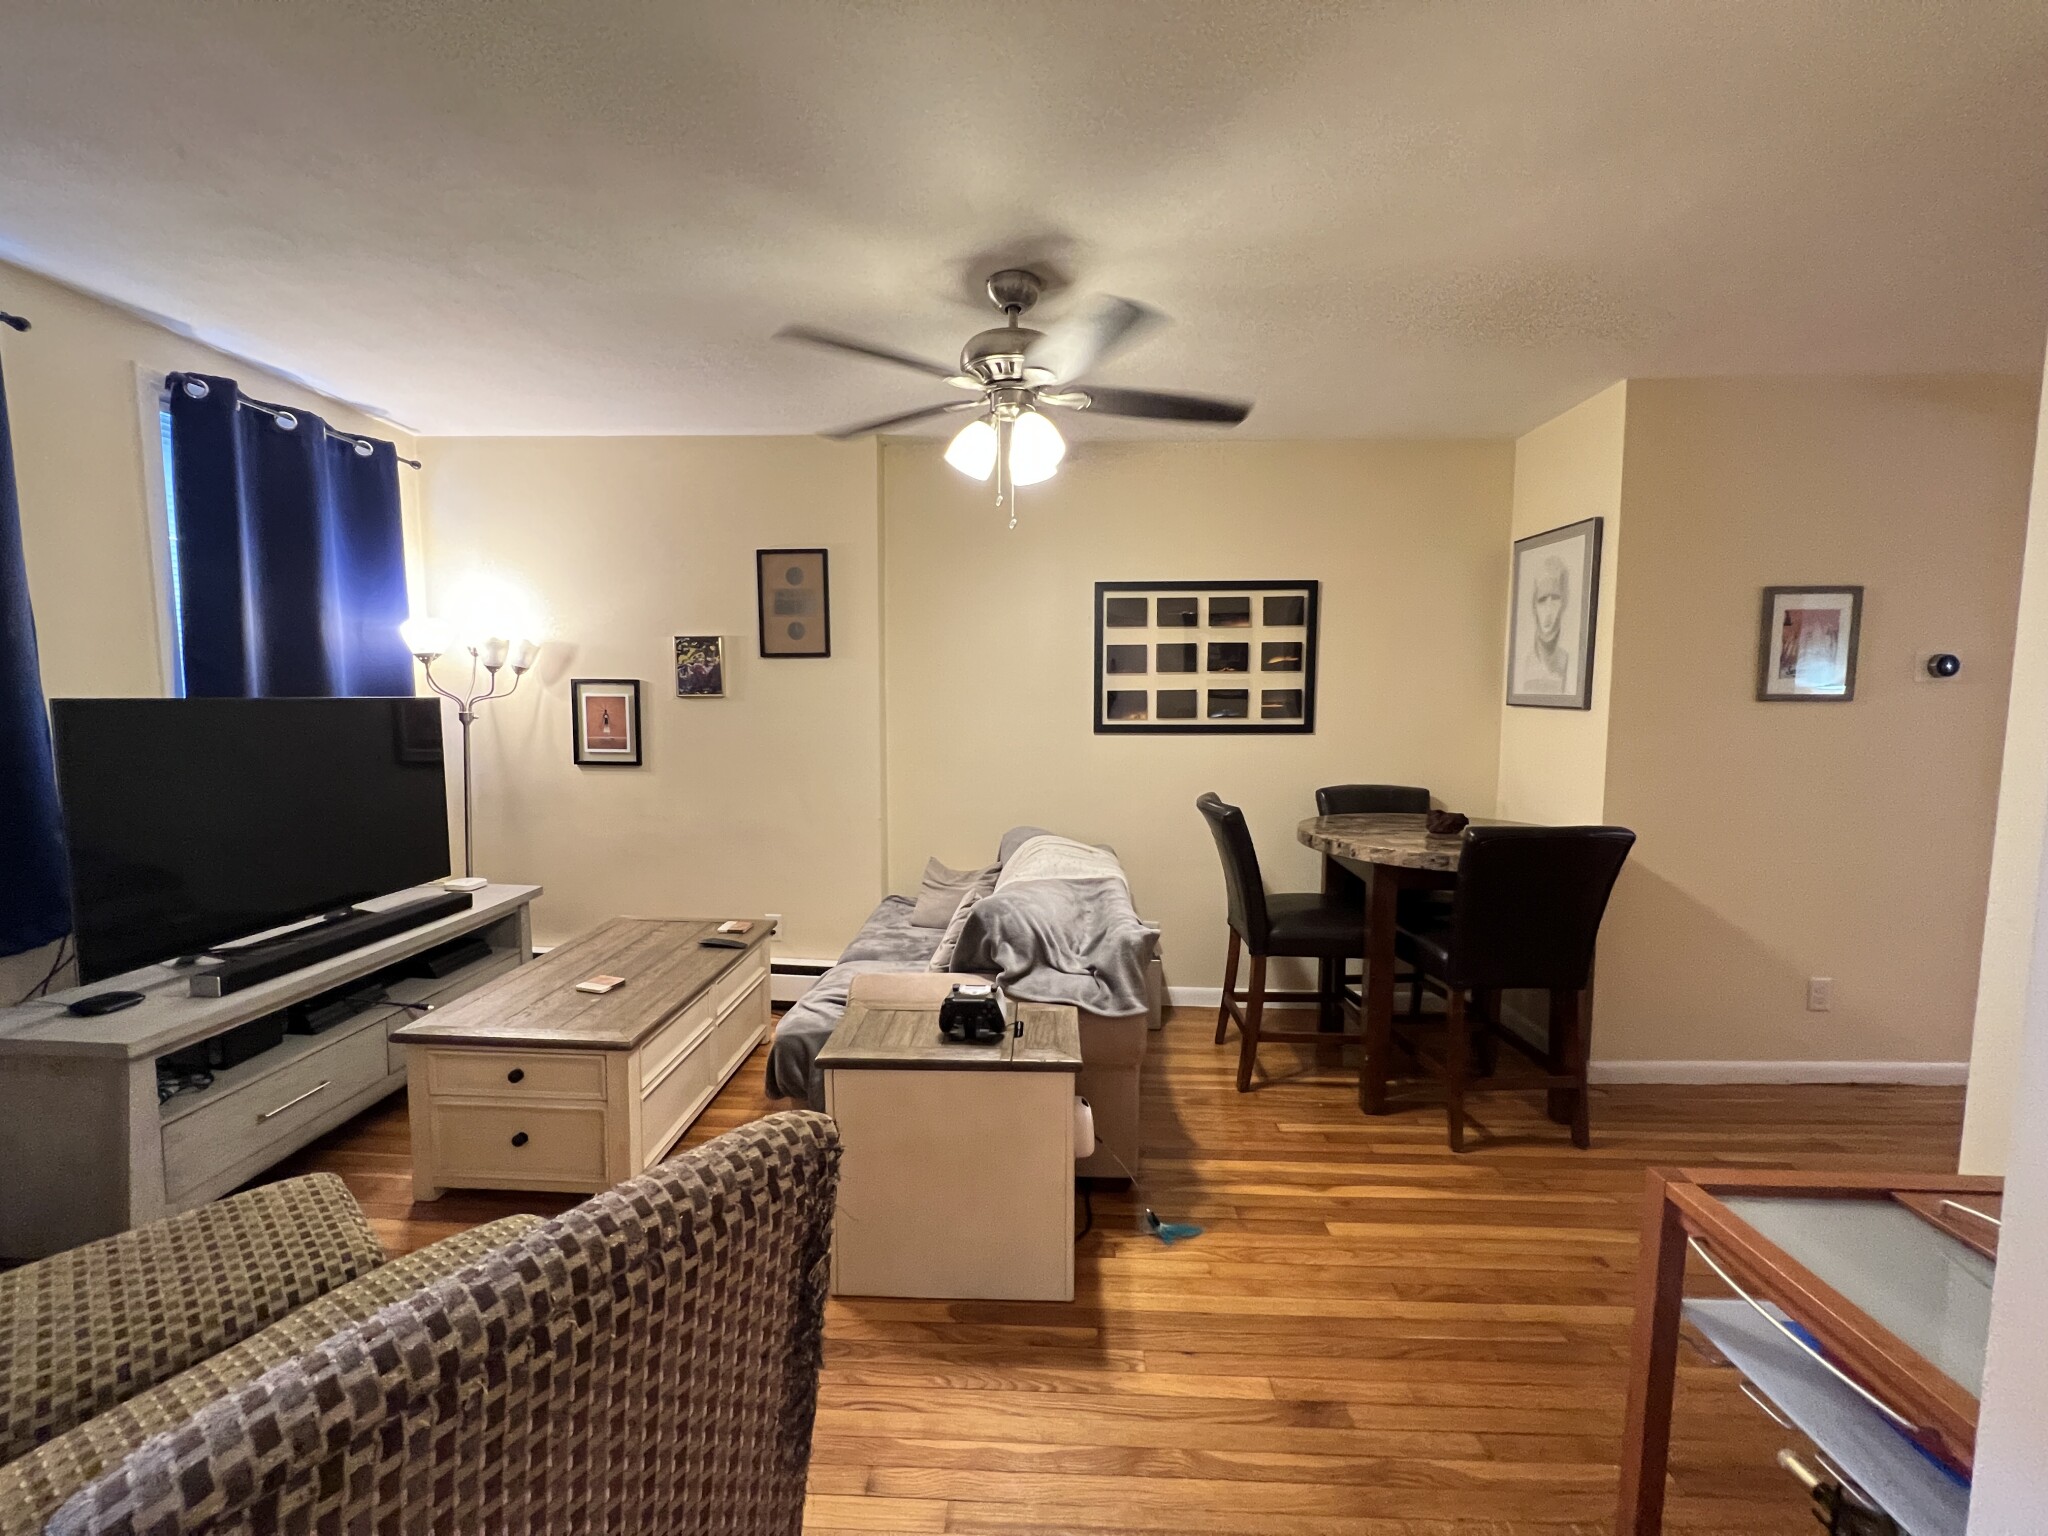 Photos of apartment on Pearl St.,Somerville MA 02145